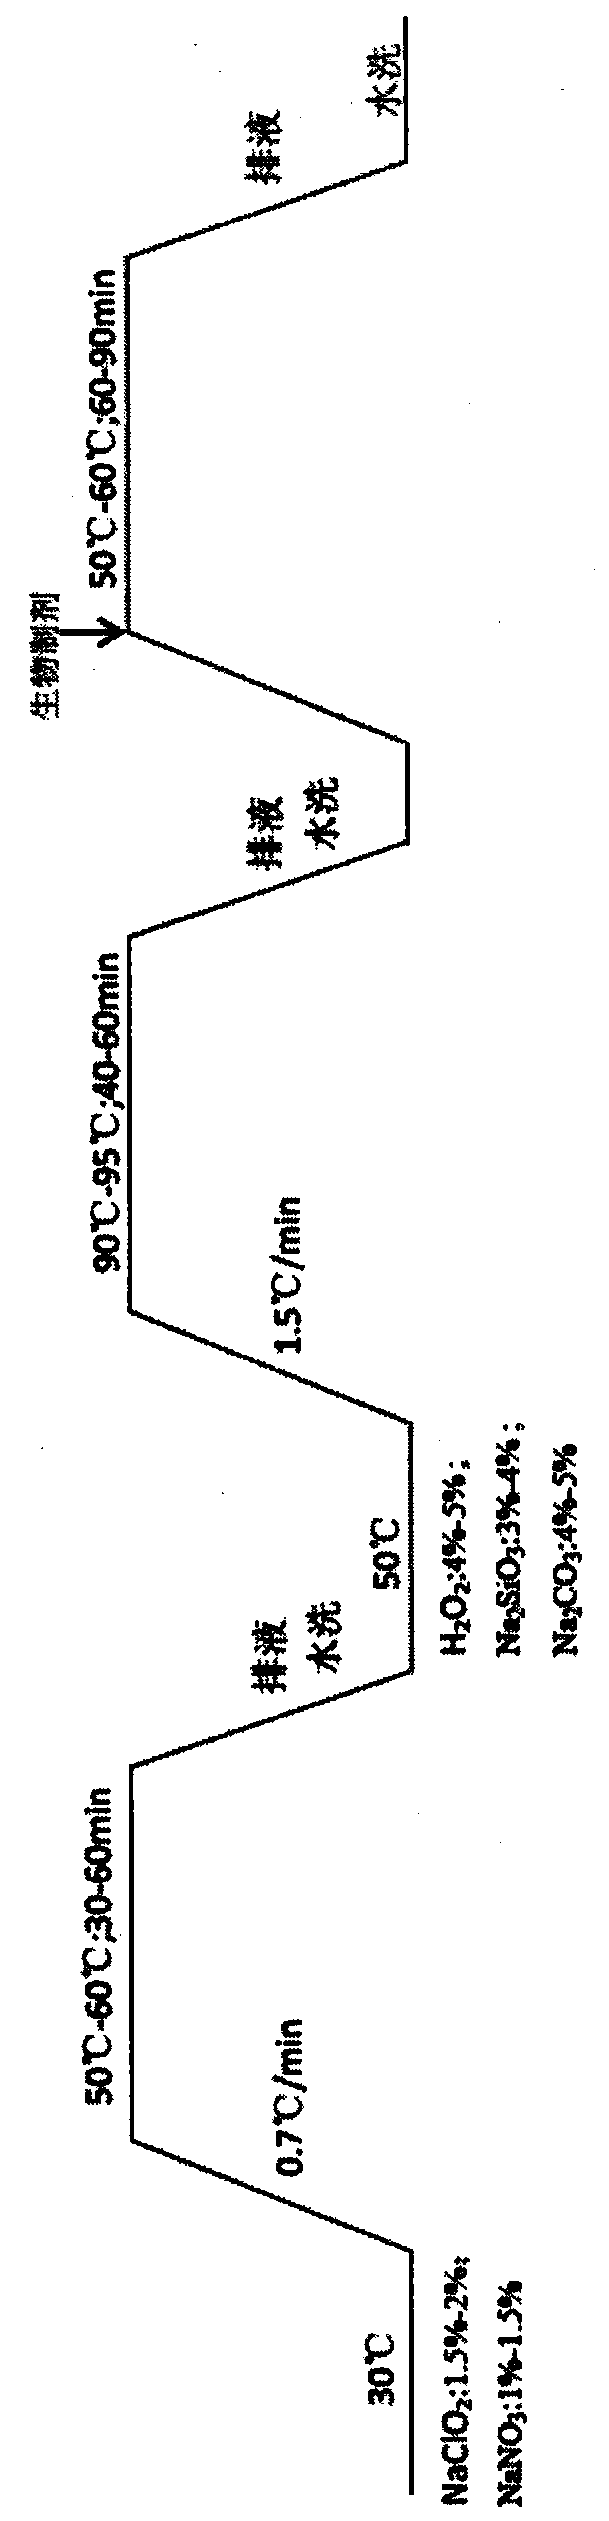 A preparation method of flax semi-bleached yarn with dyeing differentiation